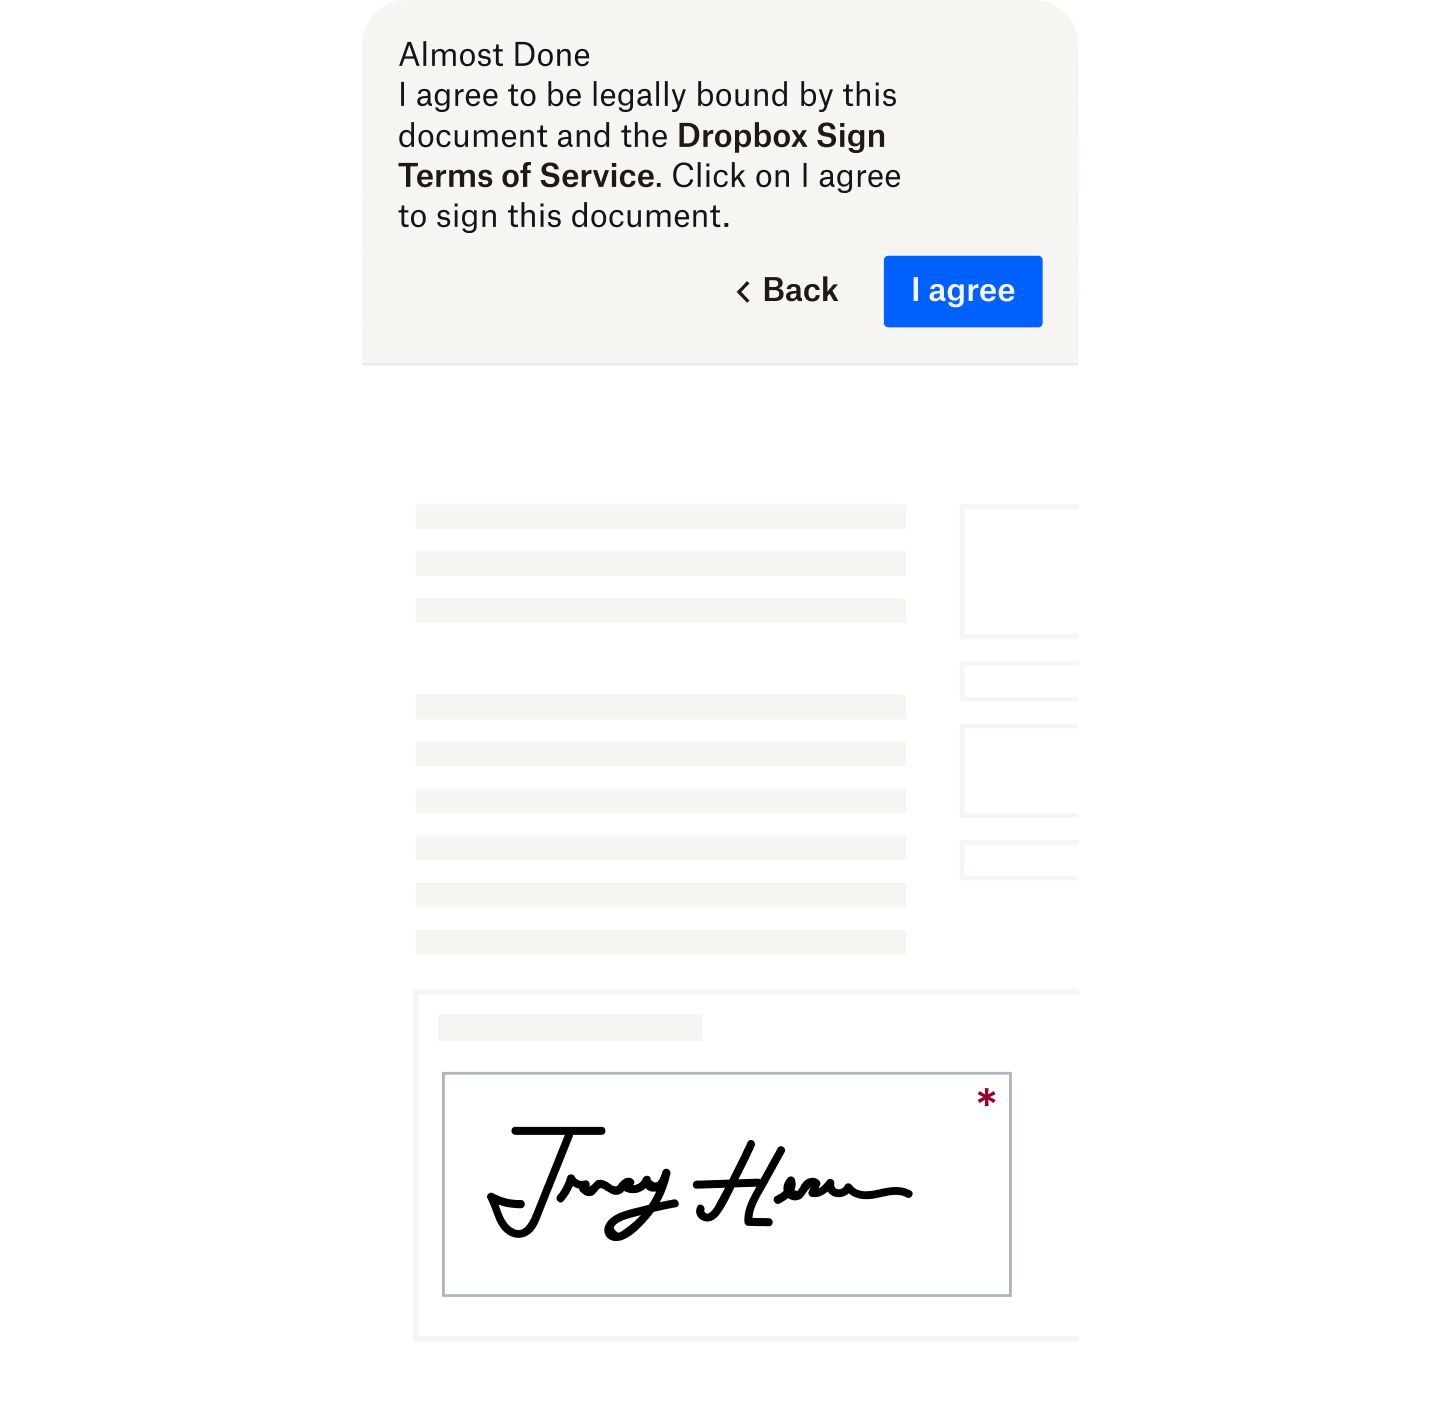 Completed form with a prompt showing that the signature is legally binding